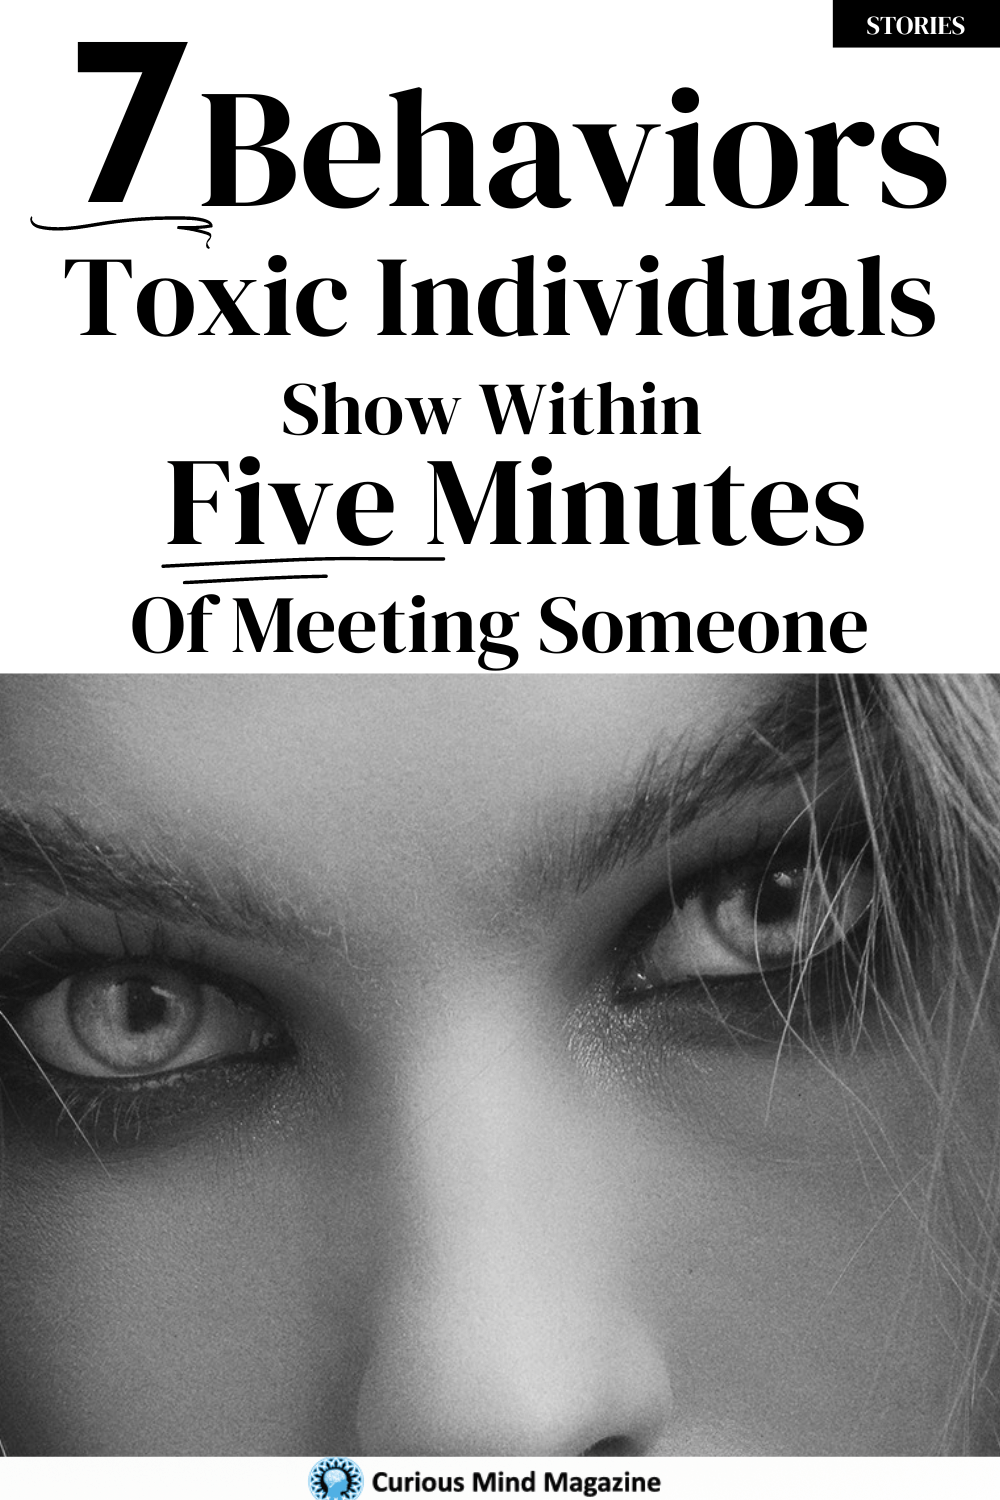 7 Behaviors Toxic Individuals Show Within 5 Minutes Of Meeting Someone